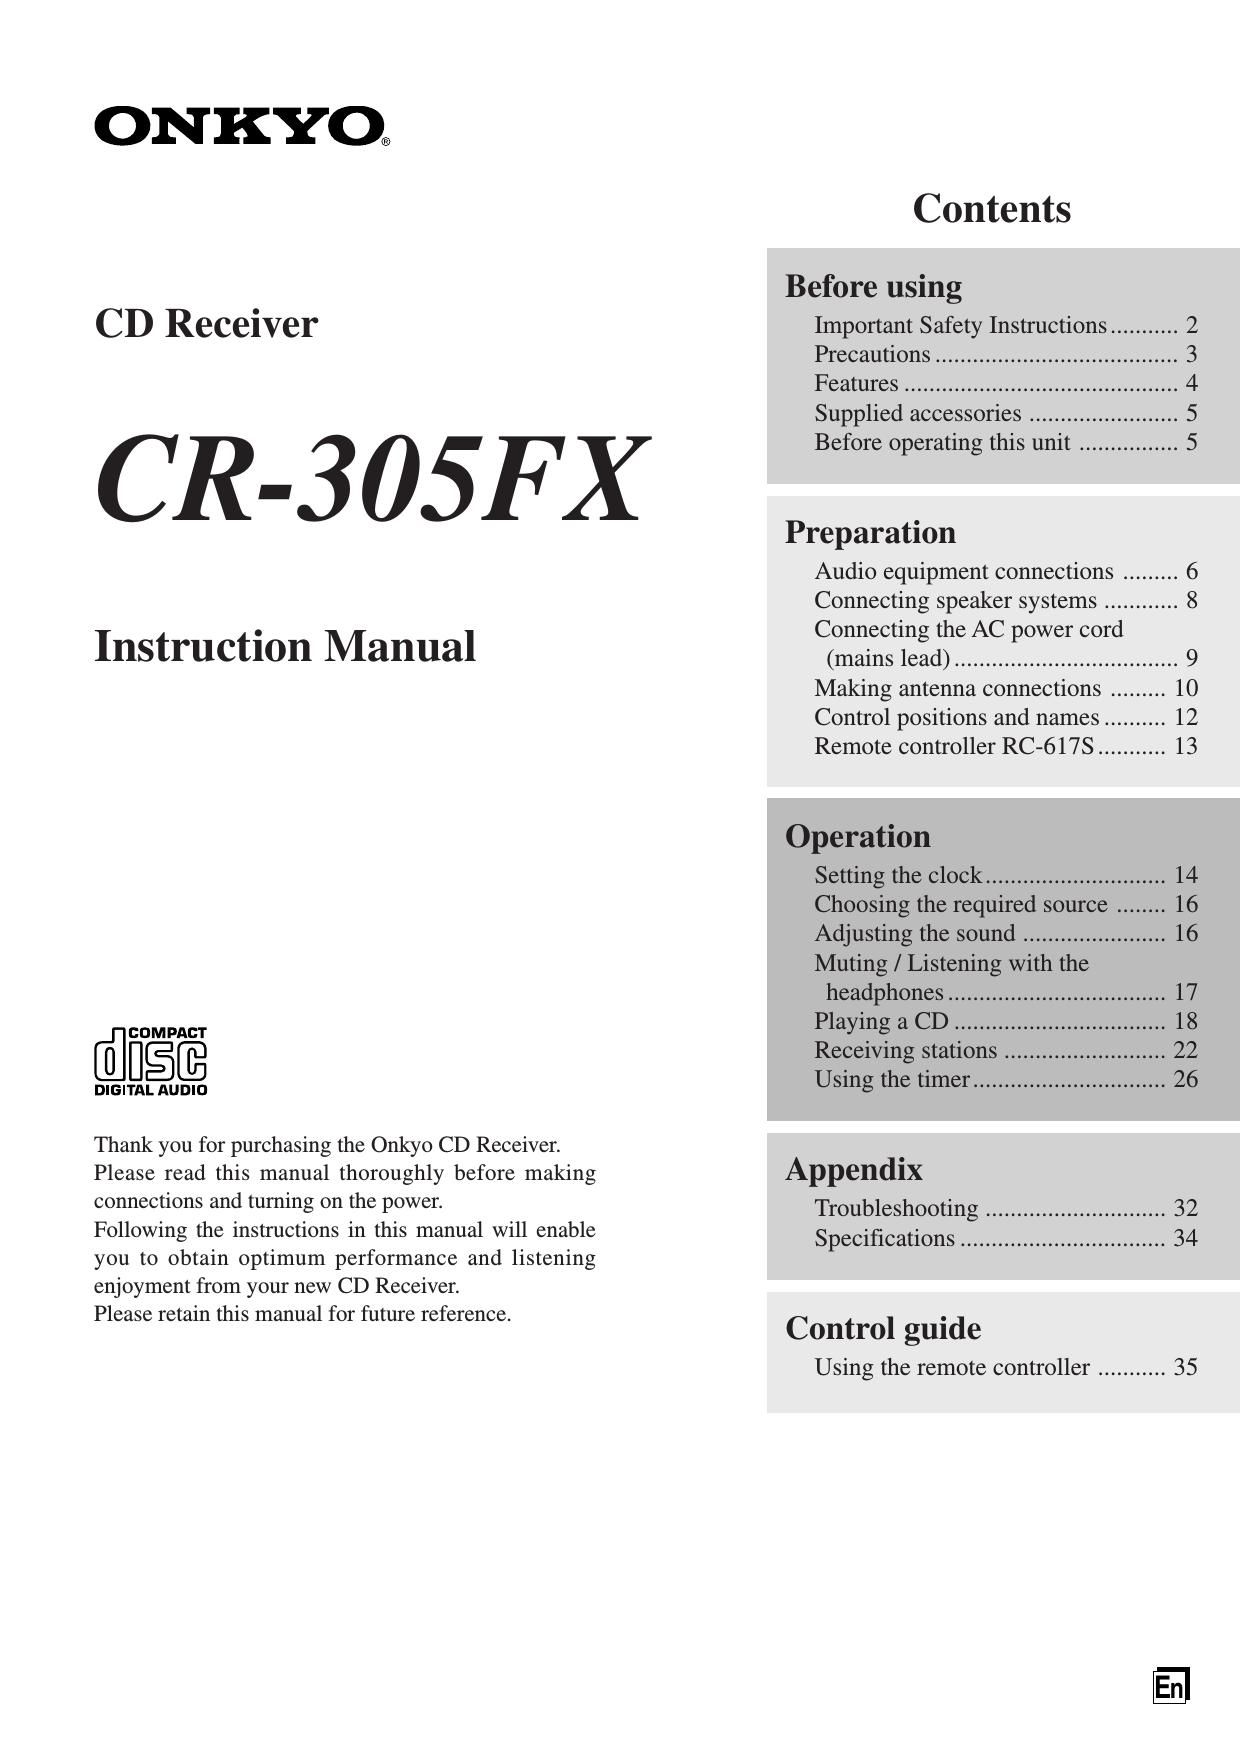 Onkyo CR 305 FX Owners Manual